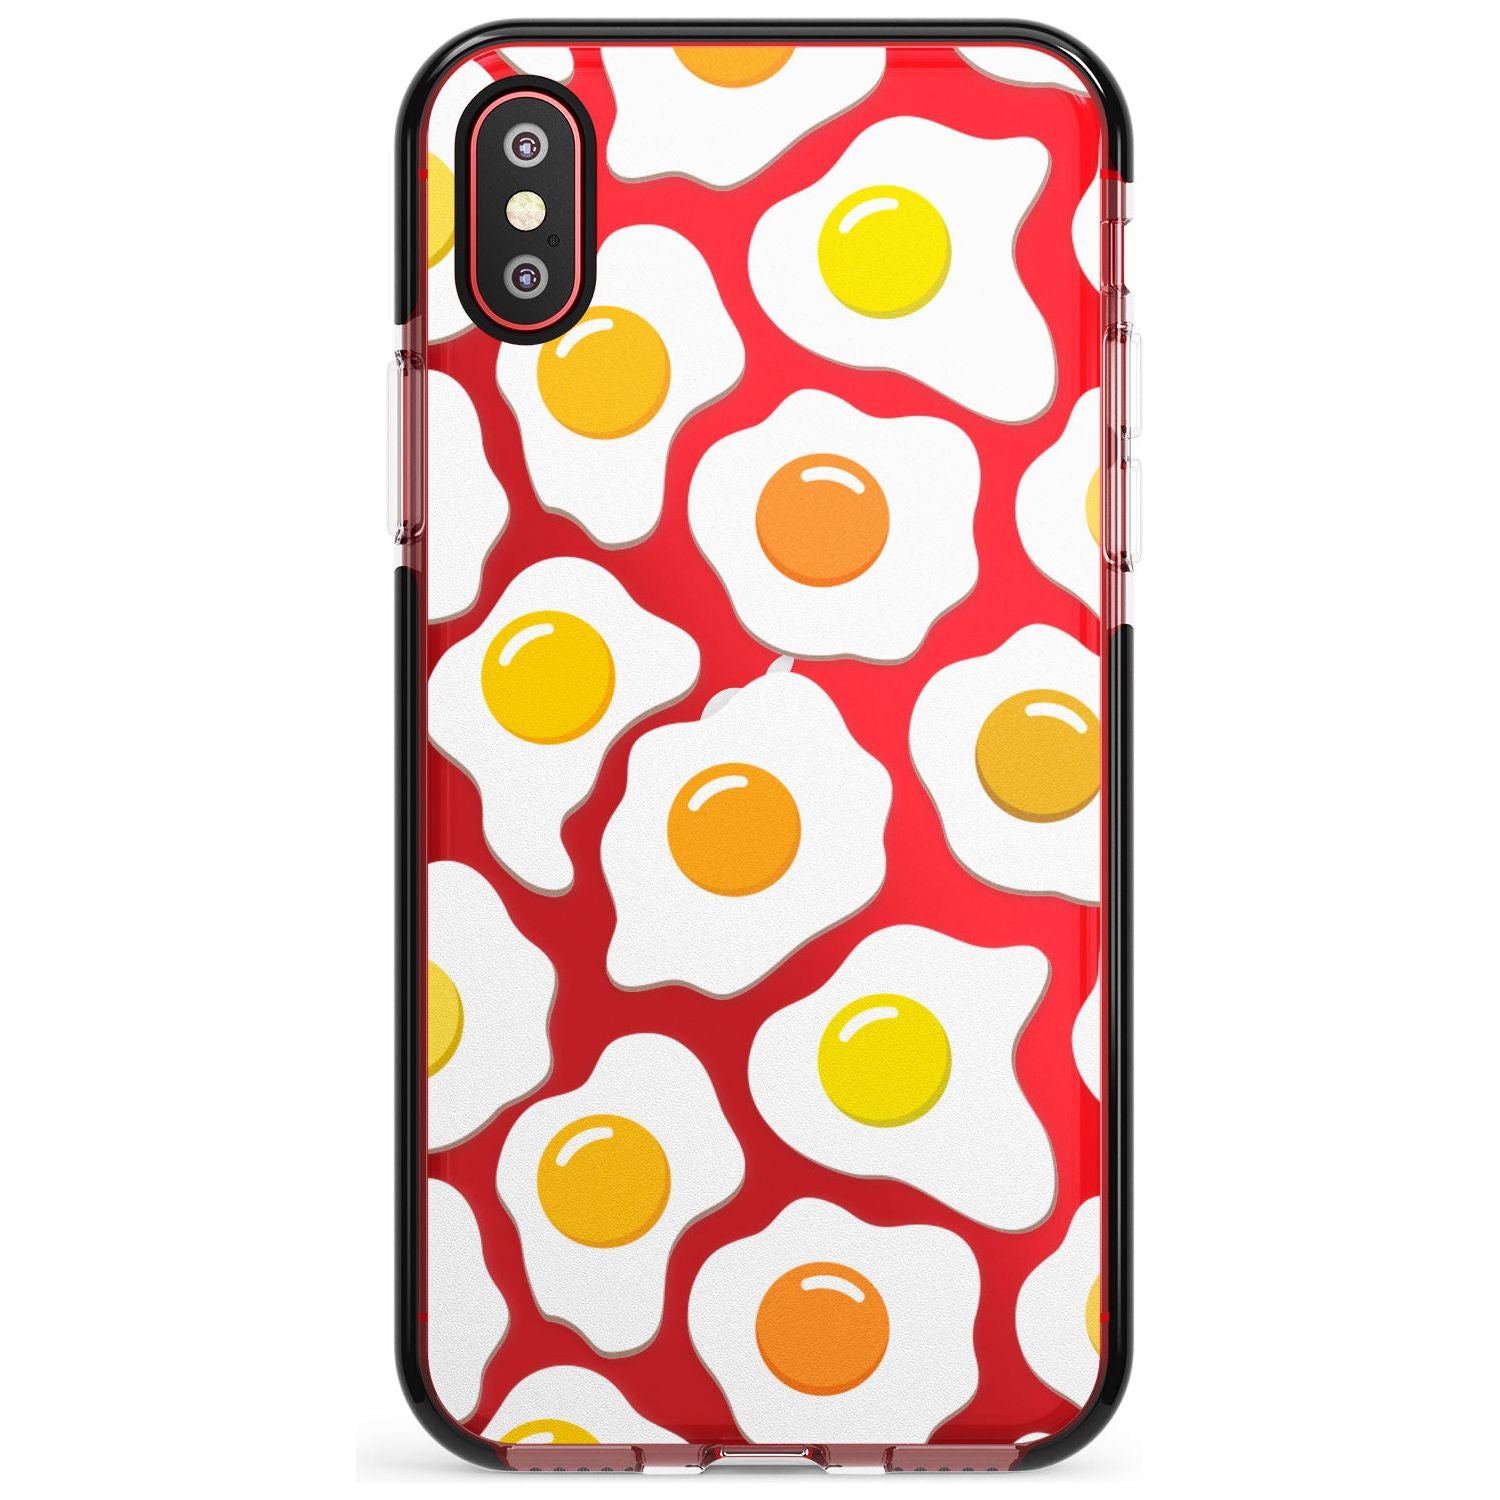 Fried Egg Pattern Black Impact Phone Case for iPhone X XS Max XR